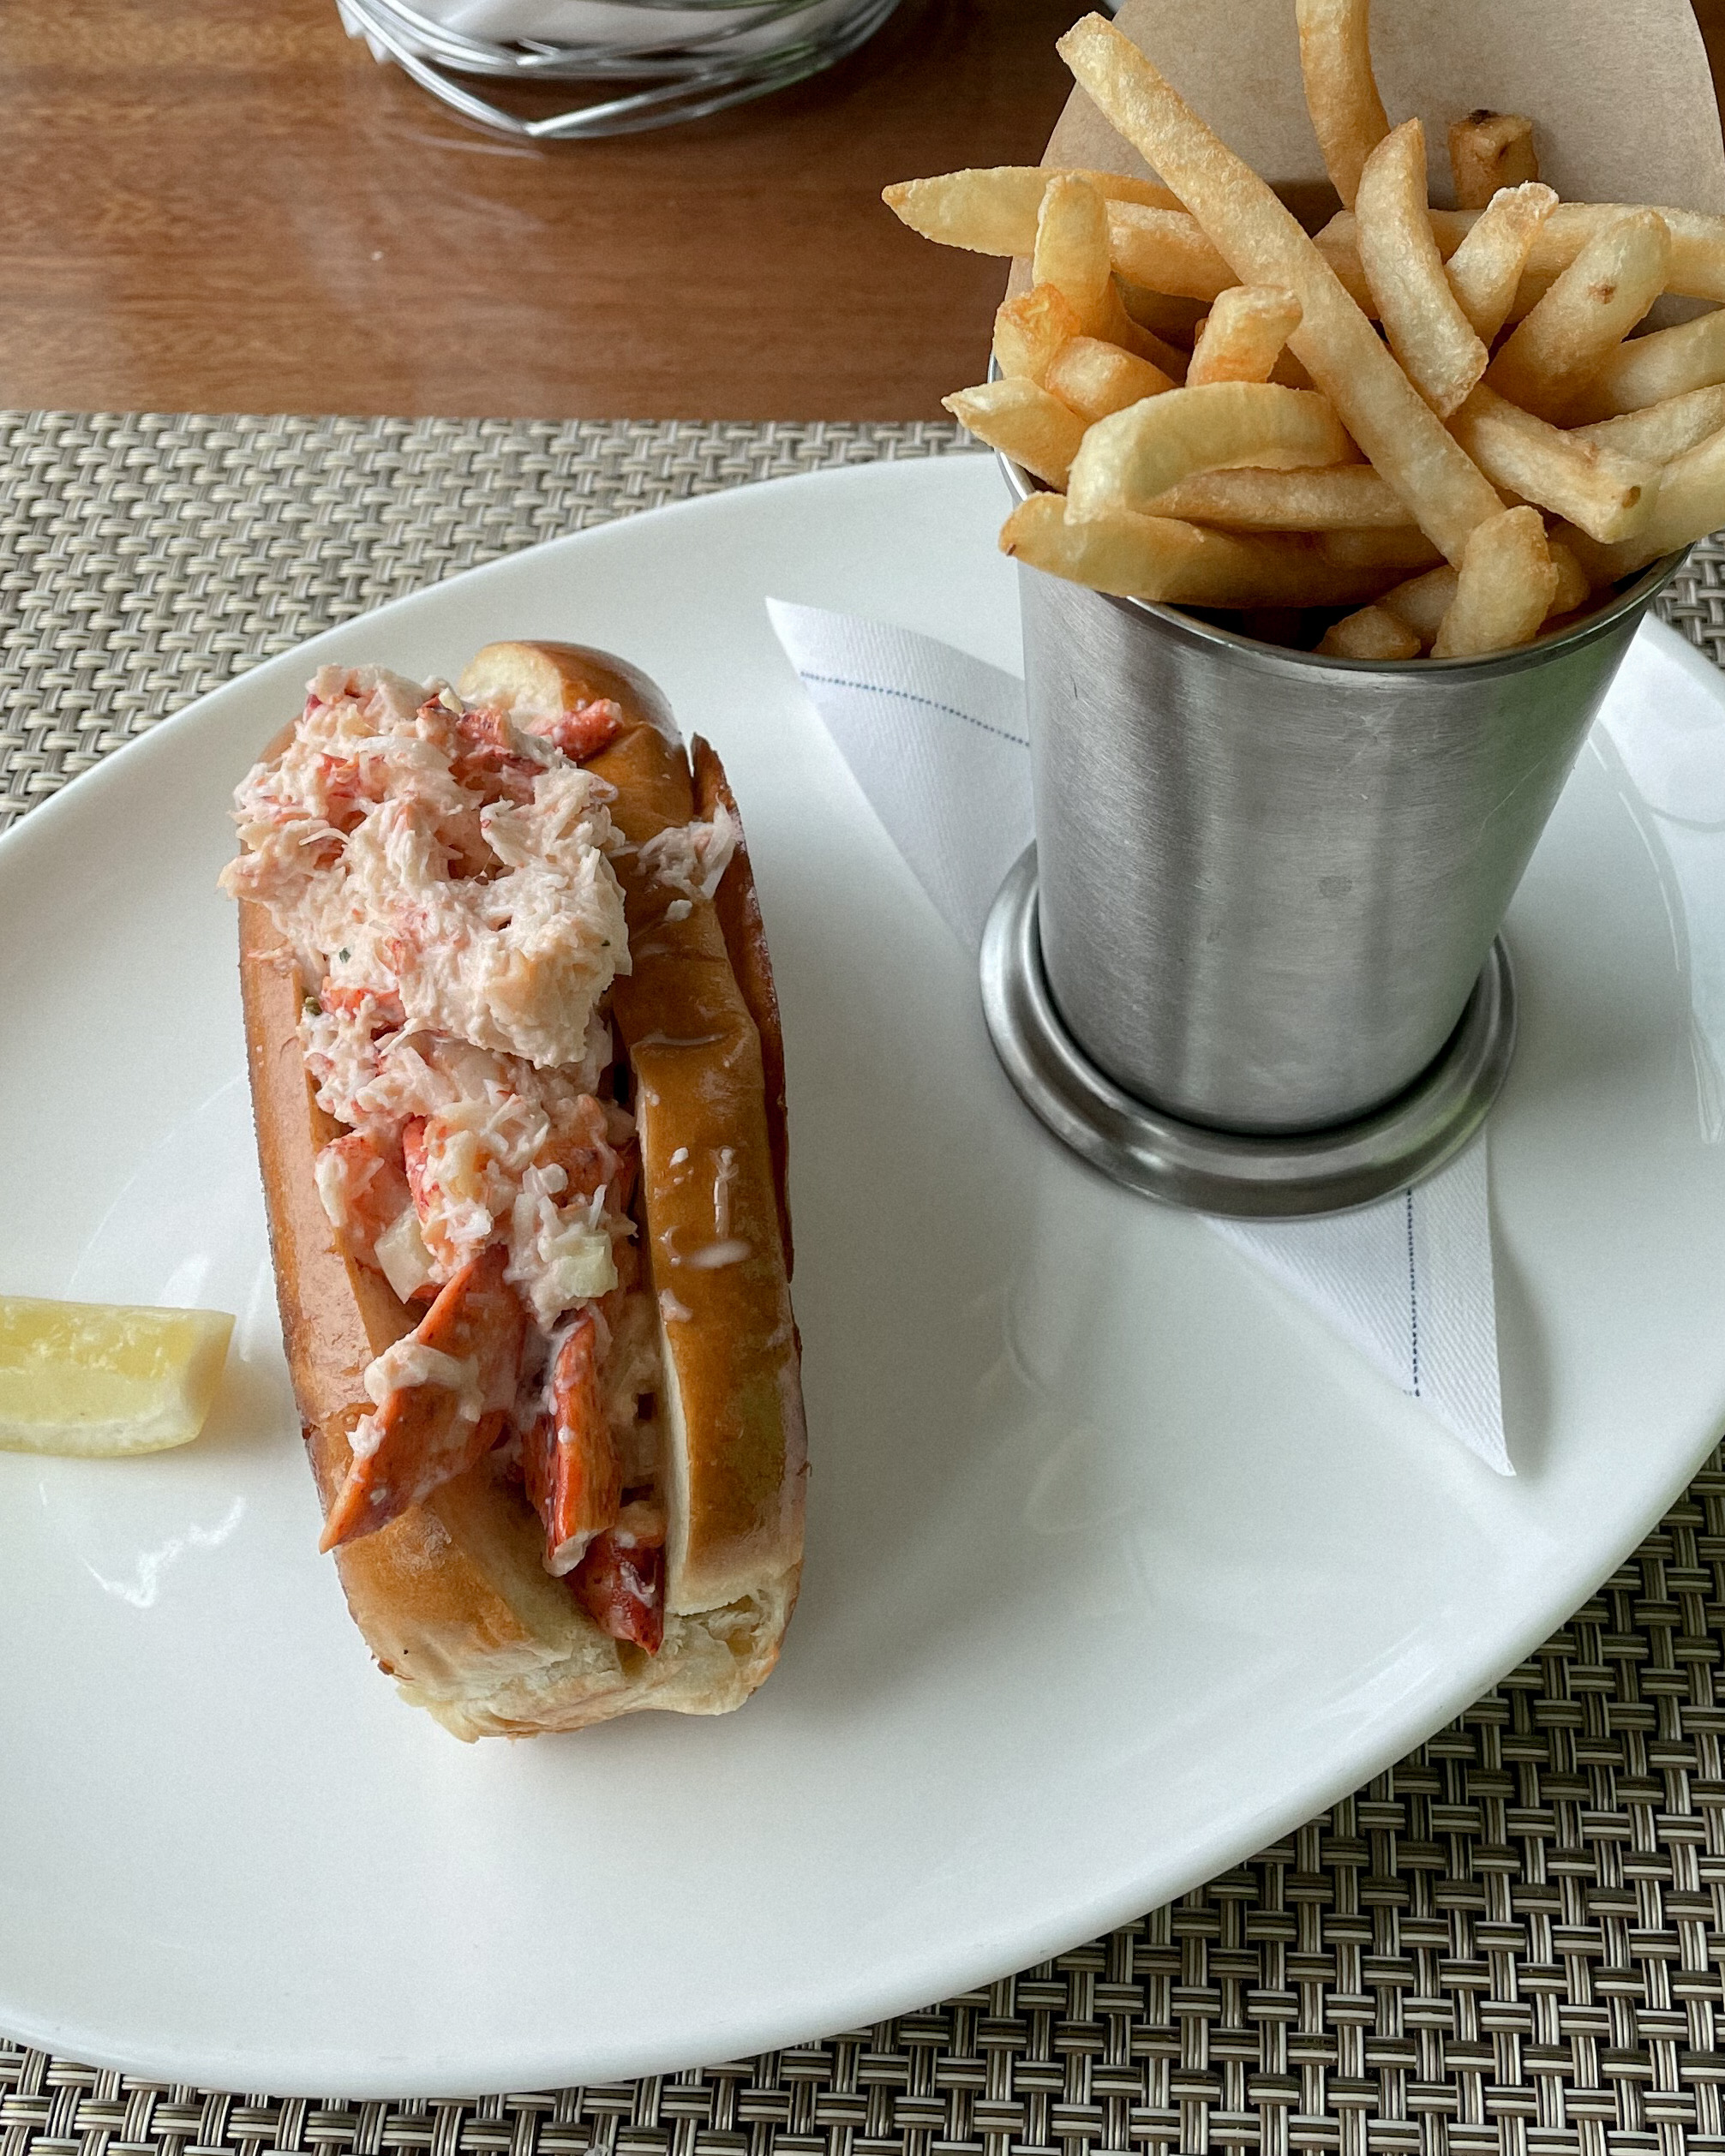 Sipping Terrace at Ocean House Rhode Island Overnight Stay - The Bistro Lobster Roll and Fries